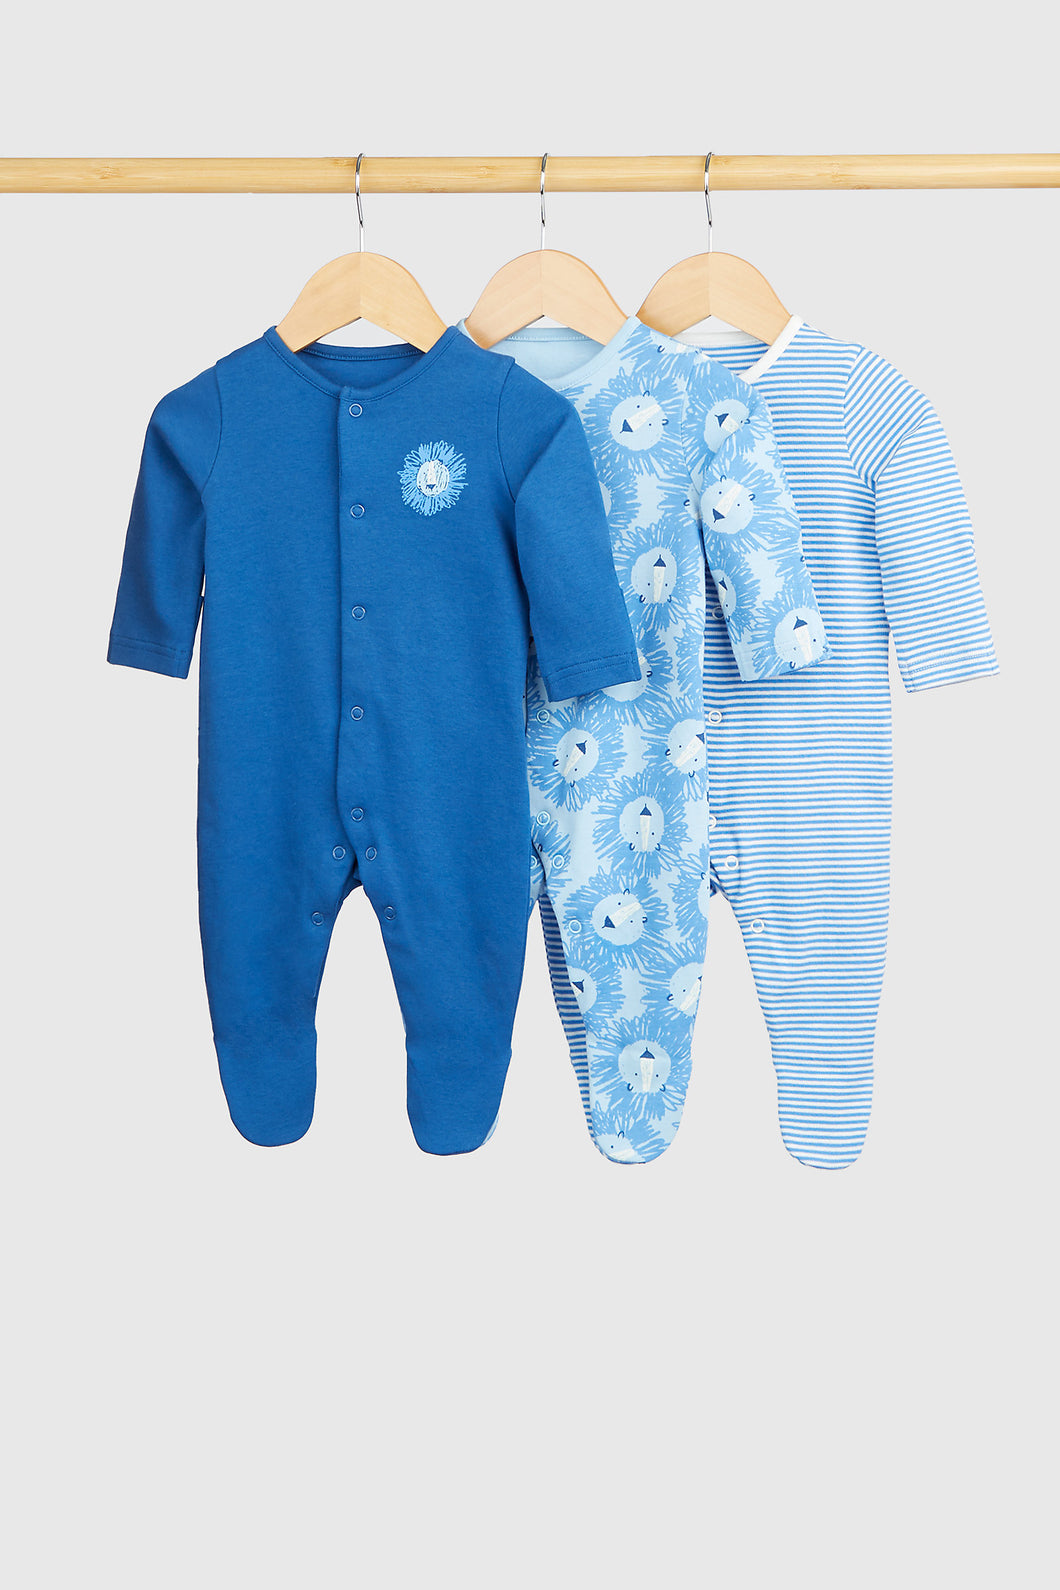 Mothercare Blue Lion Baby Sleepsuits - 3 Pack